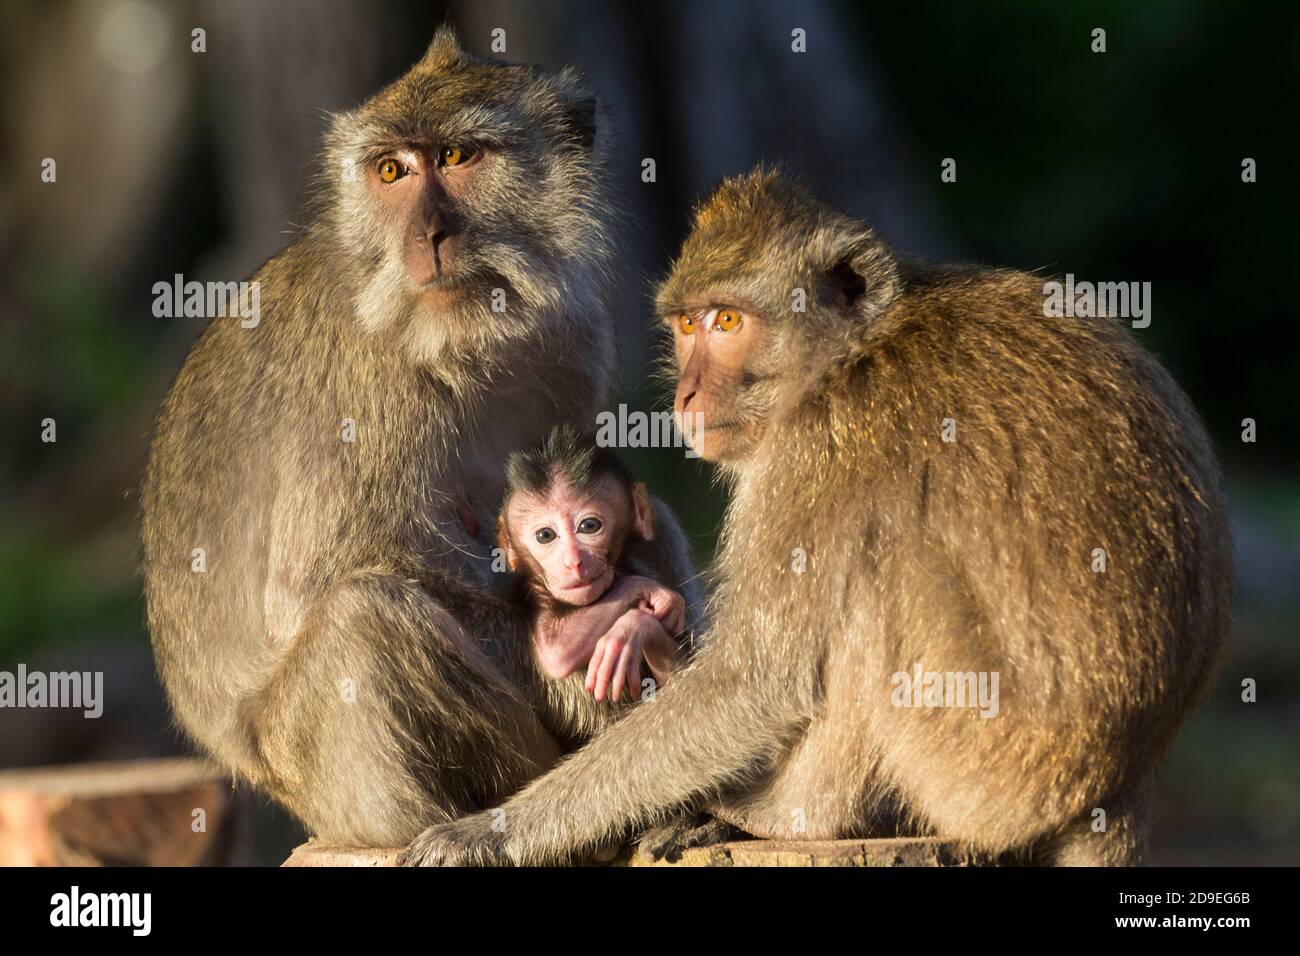 The long tailed monkey is one of the wild animals that can easily be found in Baluran National Park, Situbondo, East Java, Indonesia. Stock Photo